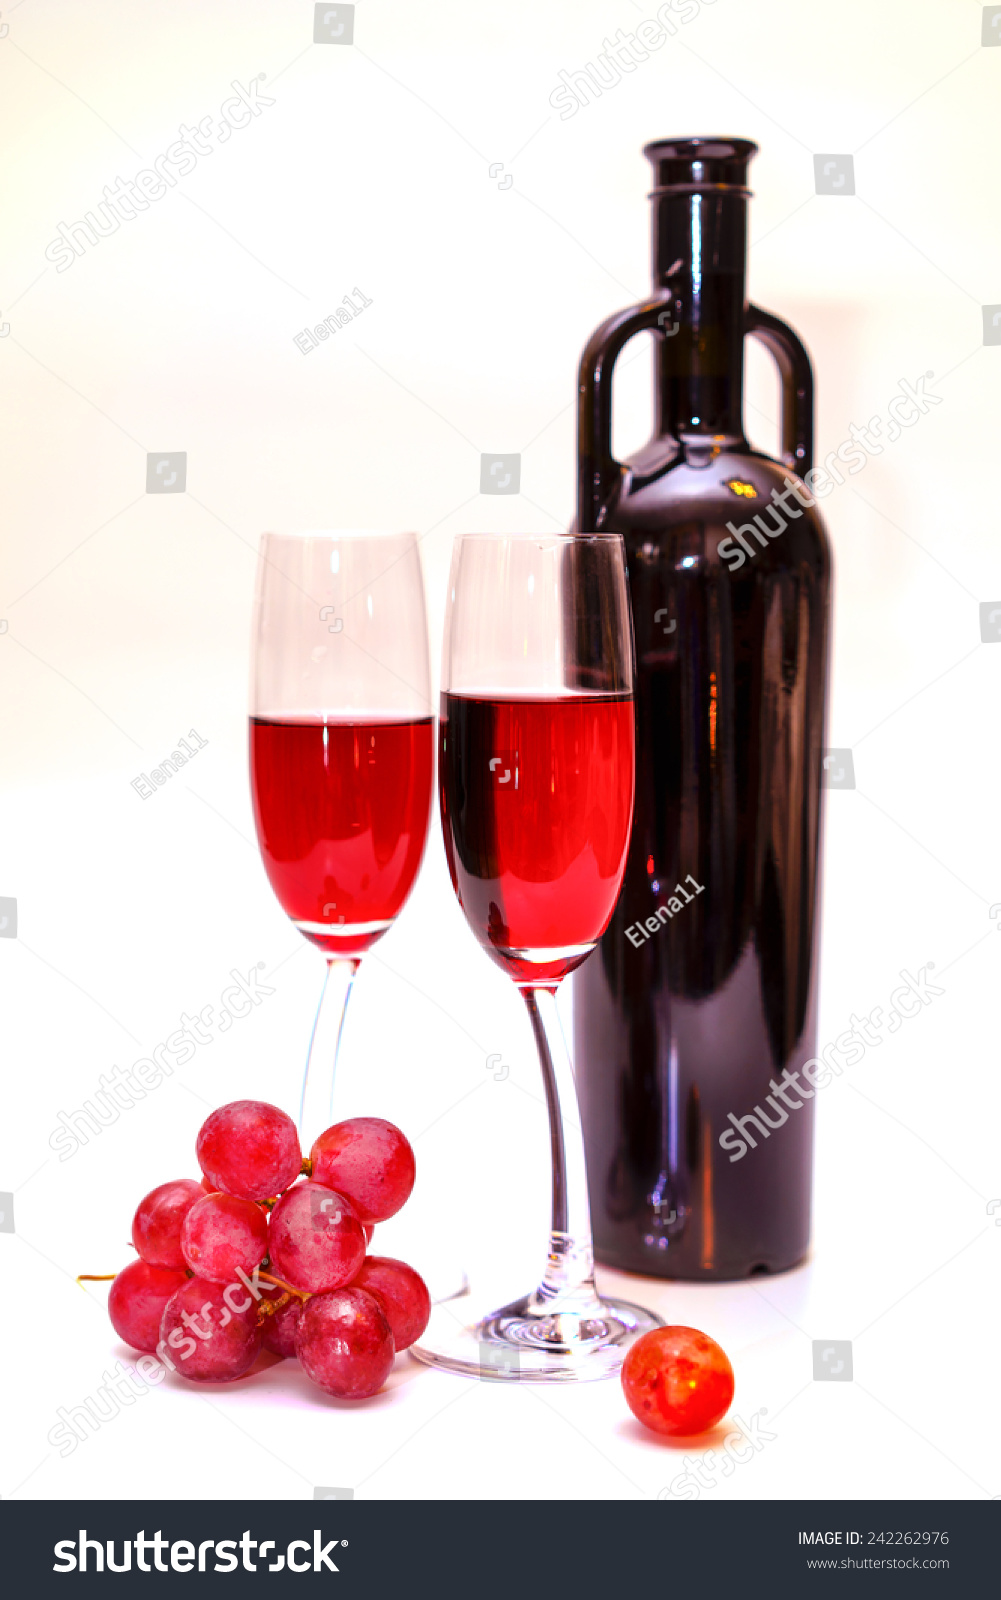 Download Original Red Vine Bottle Red Grapes Stock Photo Edit Now 242262976 PSD Mockup Templates